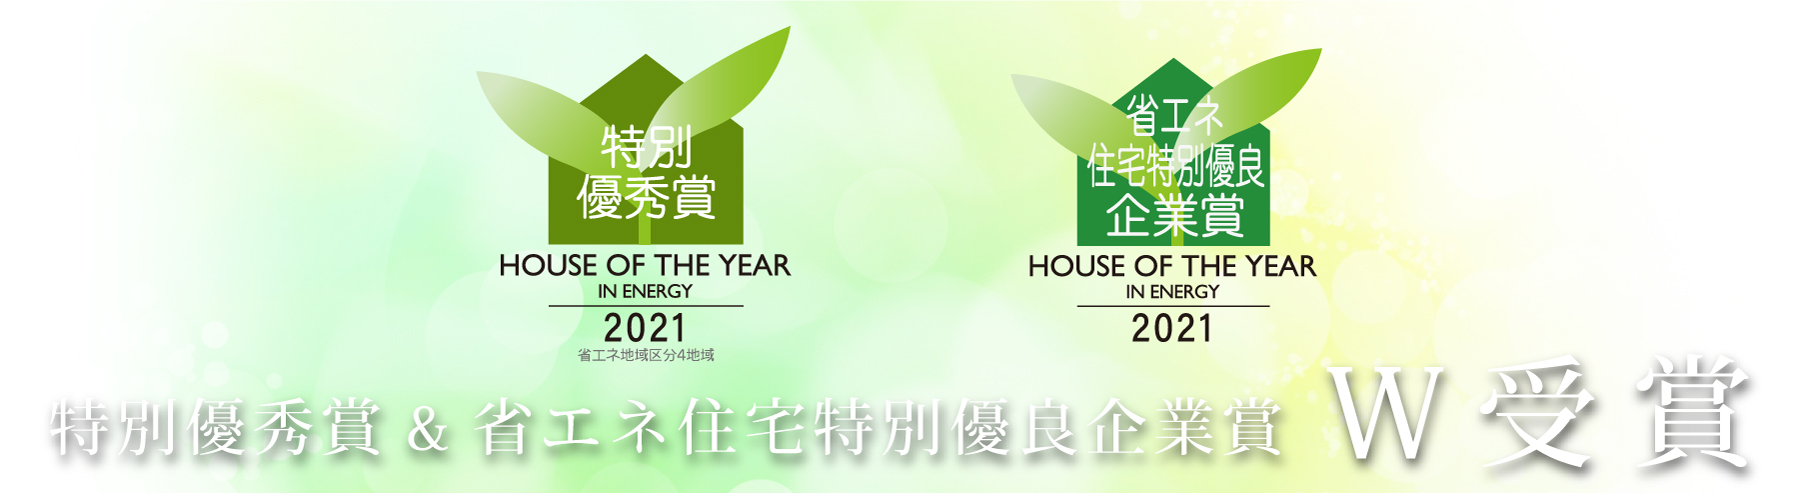 house of the year